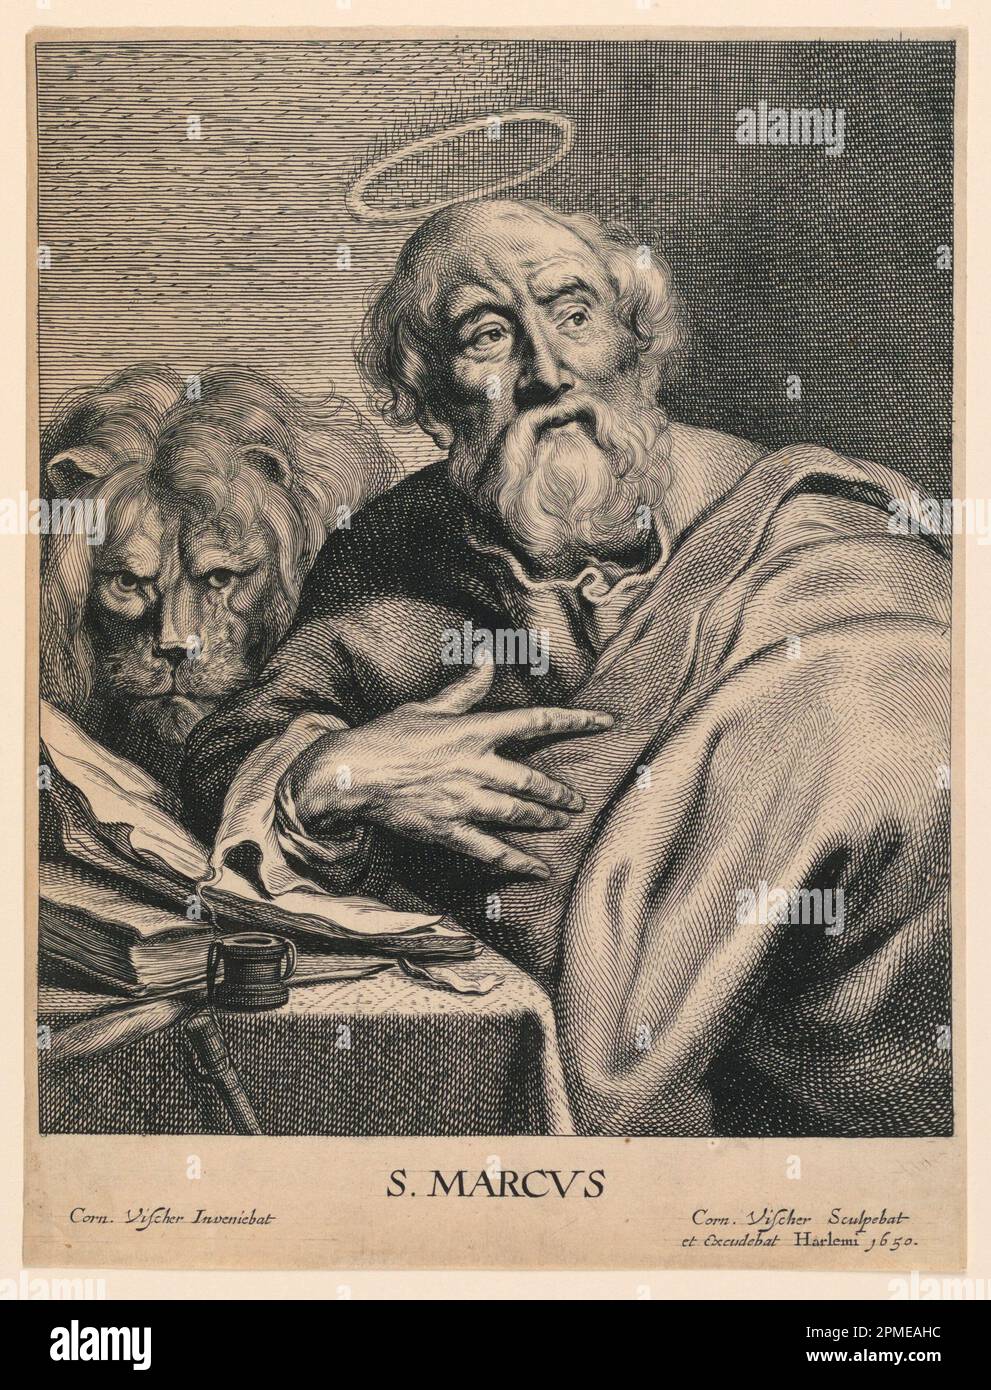 Print, St. Mark (S.Marcvs), 1650; Print Maker: Cornelis Visscher (Netherlandish, 1619 or 1629 – 1662); Netherlands; engraving on off-white laid paper; Paper: 25.4 x 19.8 cm (10 x 7 13/16 in.) Plate: 22.9 x 18.8 cm (9 x 7 3/8 in.); Bequest of George Campbell Cooper; 1896-3-206 Stock Photo